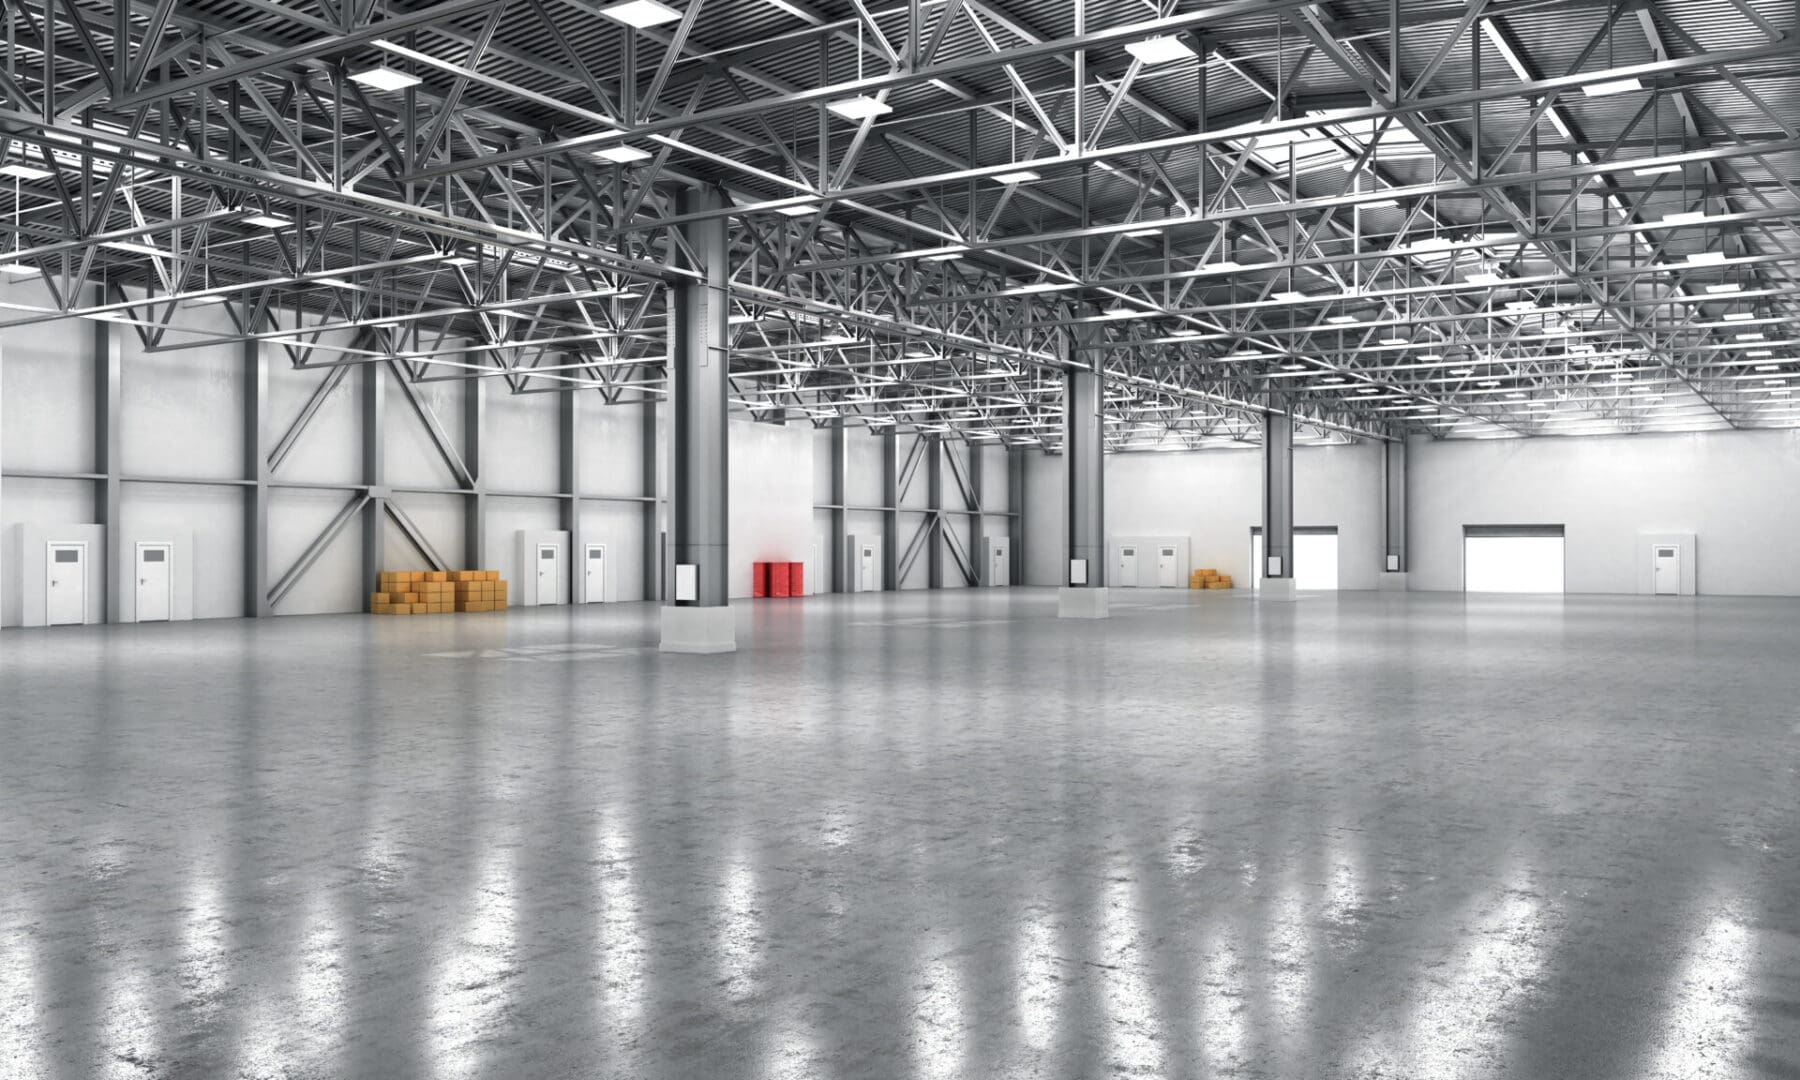 A large warehouse with lots of lights and concrete floors.